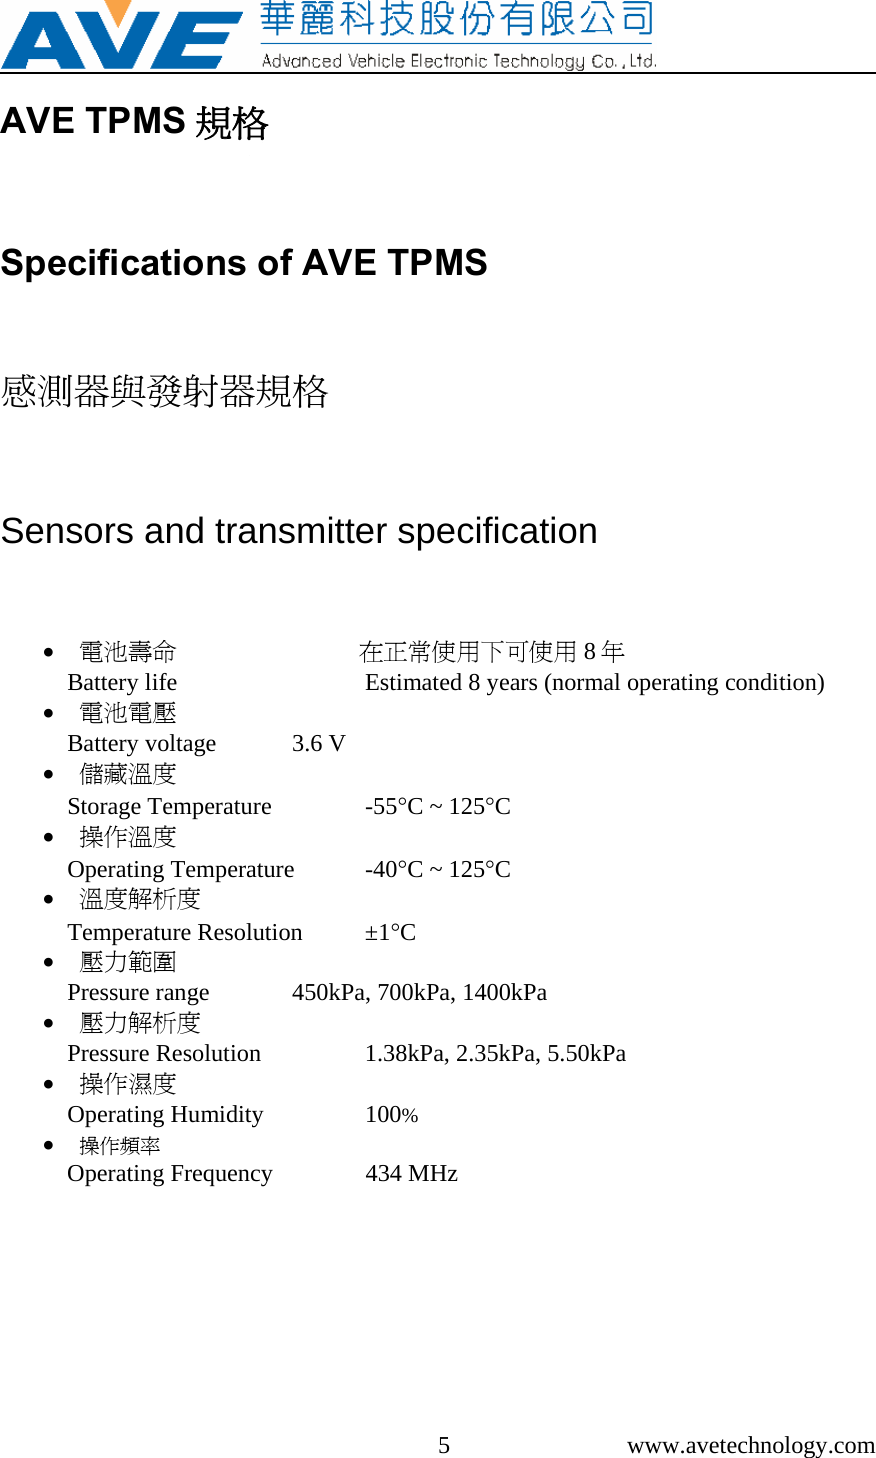     5 www.avetechnology.com AVE TPMS 規格 Specifications of AVE TPMS 感測器與發射器規格 Sensors and transmitter specification • 電池壽命                              在正常使用下可使用 8年 Battery life      Estimated 8 years (normal operating condition) • 電池電壓 Battery voltage   3.6 V • 儲藏溫度 Storage Temperature    -55°C ~ 125°C • 操作溫度 Operating Temperature  -40°C ~ 125°C • 溫度解析度 Temperature Resolution  ±1°C • 壓力範圍 Pressure range   450kPa, 700kPa, 1400kPa • 壓力解析度 Pressure Resolution    1.38kPa, 2.35kPa, 5.50kPa • 操作濕度 Operating Humidity    100% • 操作頻率 Operating Frequency              434 MHz  